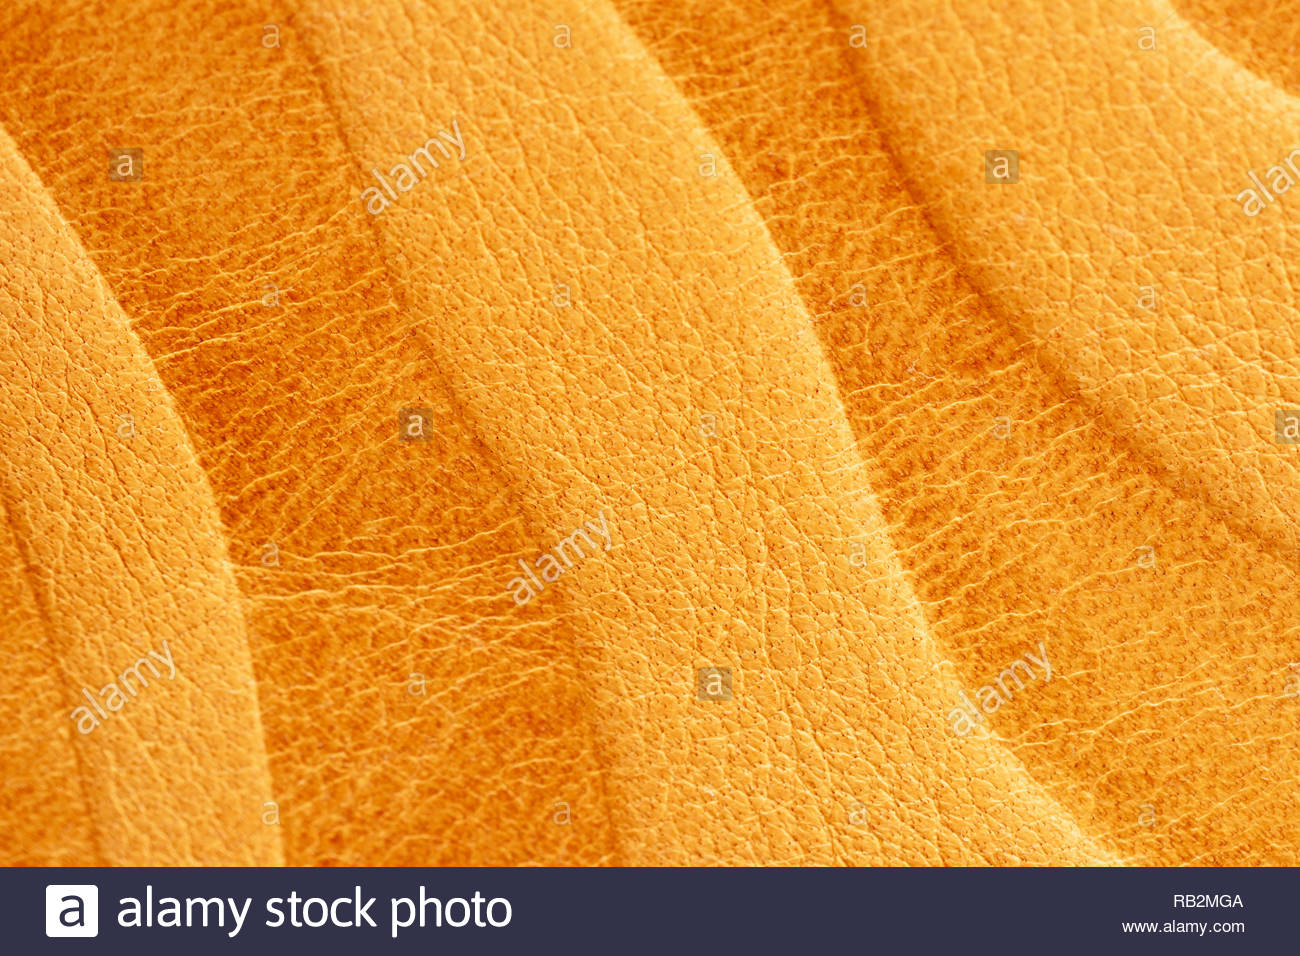 Texture Of Golden Yellow Genuine Leather Close Up With Embossed